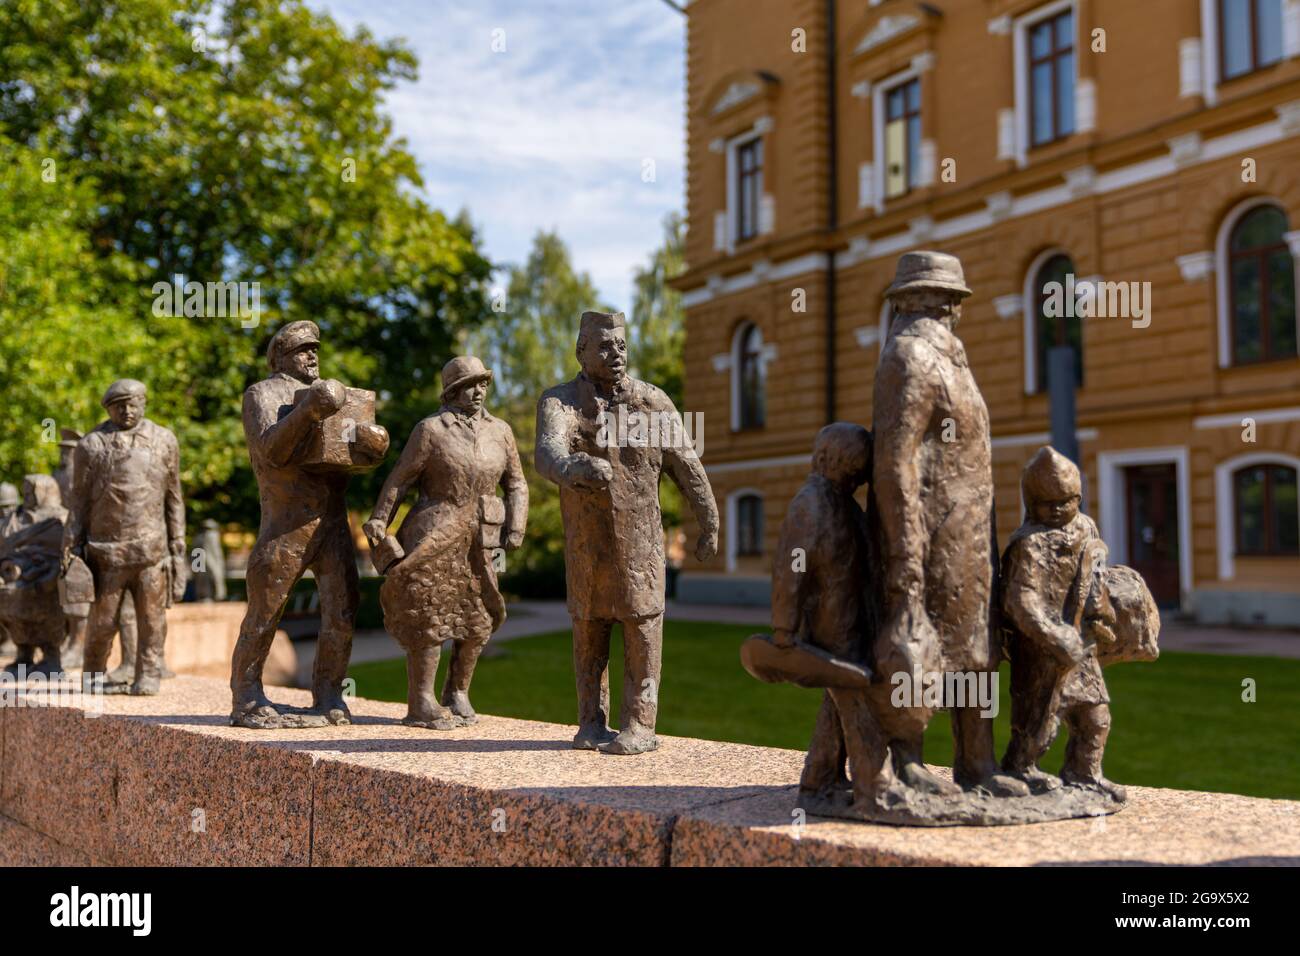 Oulu, Finland - 25 July, 2021: view of the Ajan Kulku bronze statues commemorating the city history of Oulu in the park in front of the city hall Stock Photo